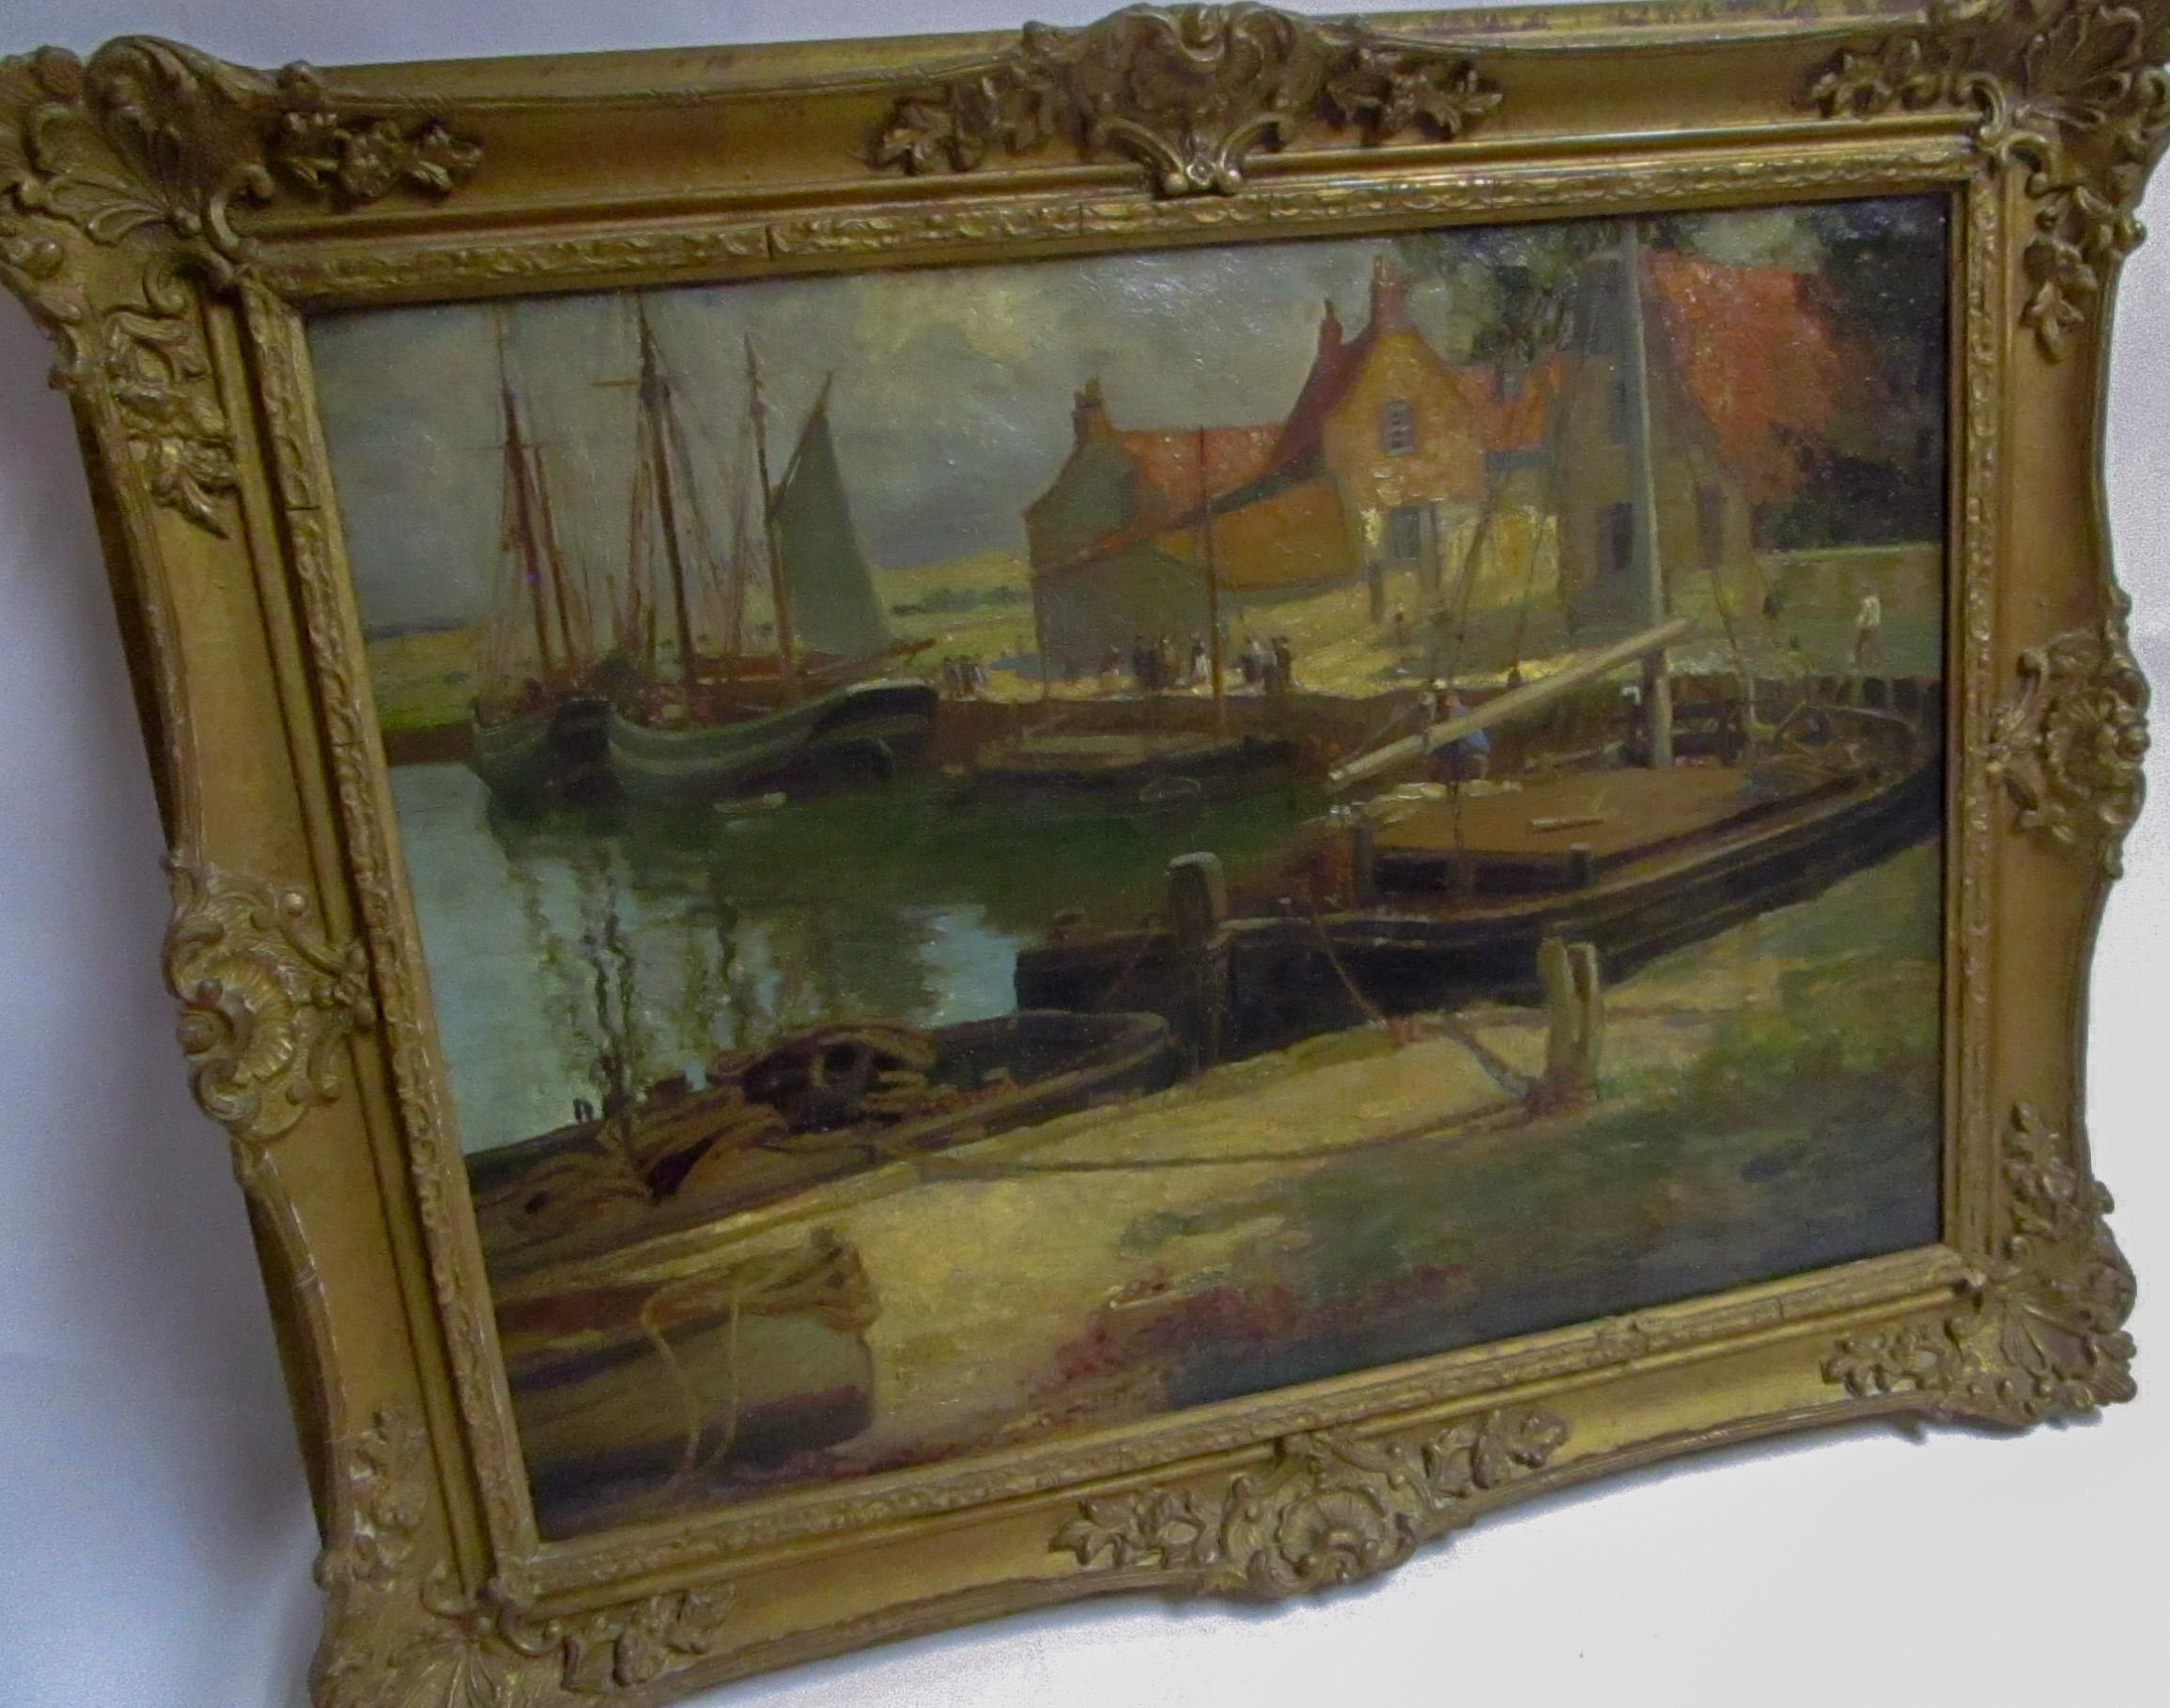 Early 20th c English School Oil Painting Dock & Fishing Boats by Frederick Stead In Good Condition For Sale In Savannah, GA